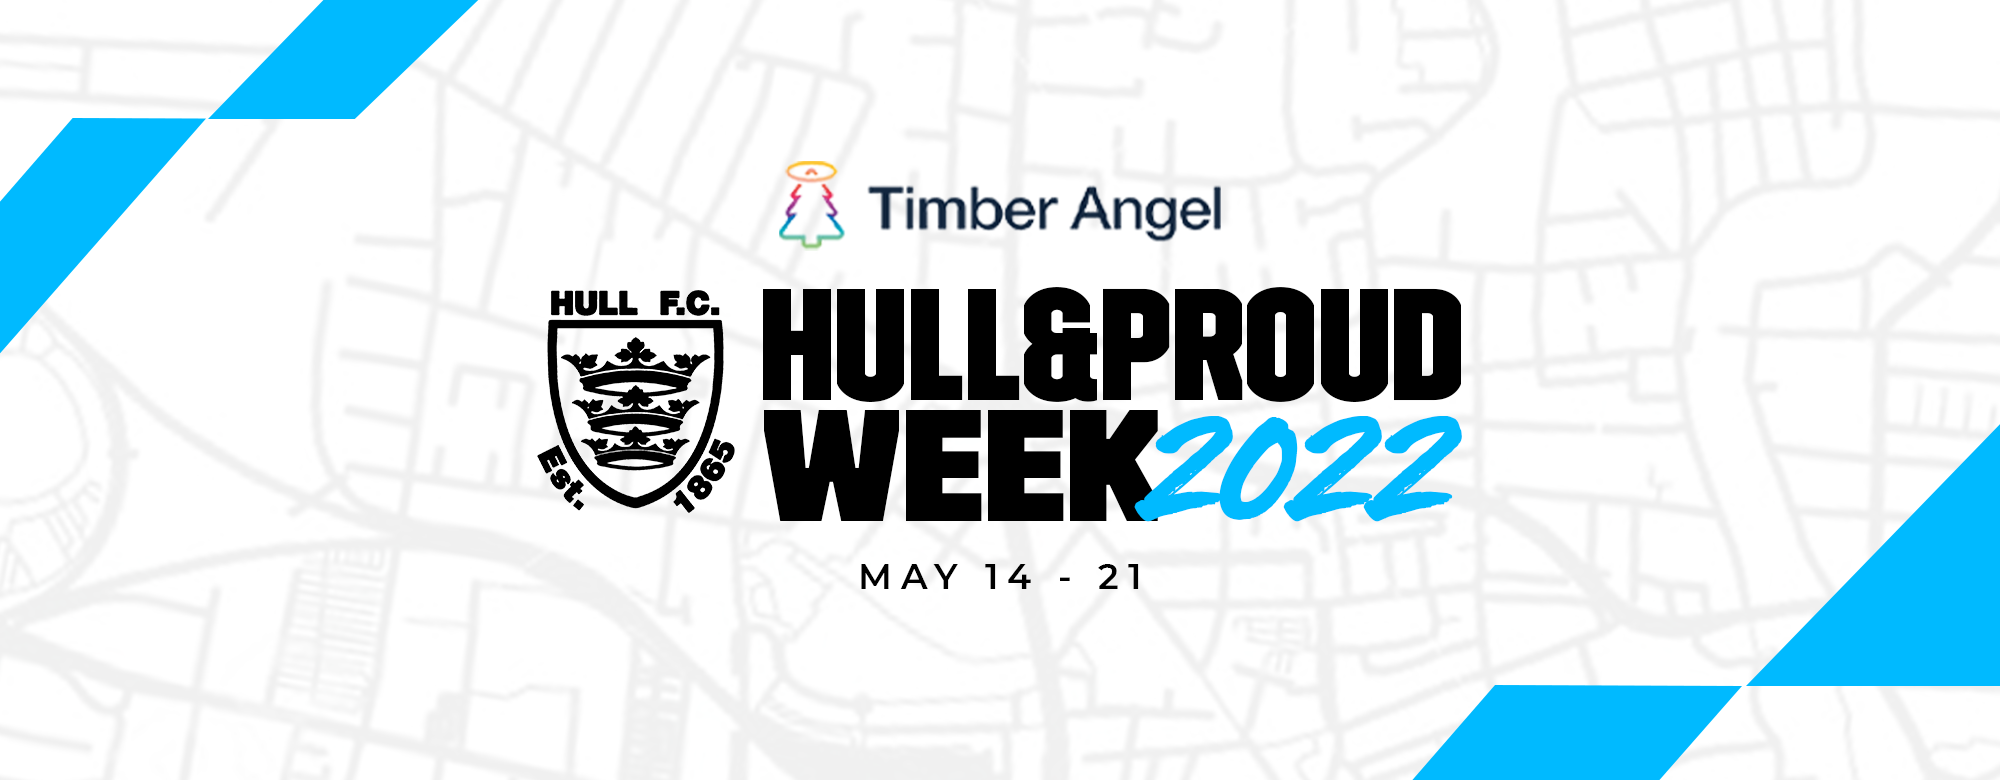 Hull&Proud Week Schedule Unveiled For 2022!